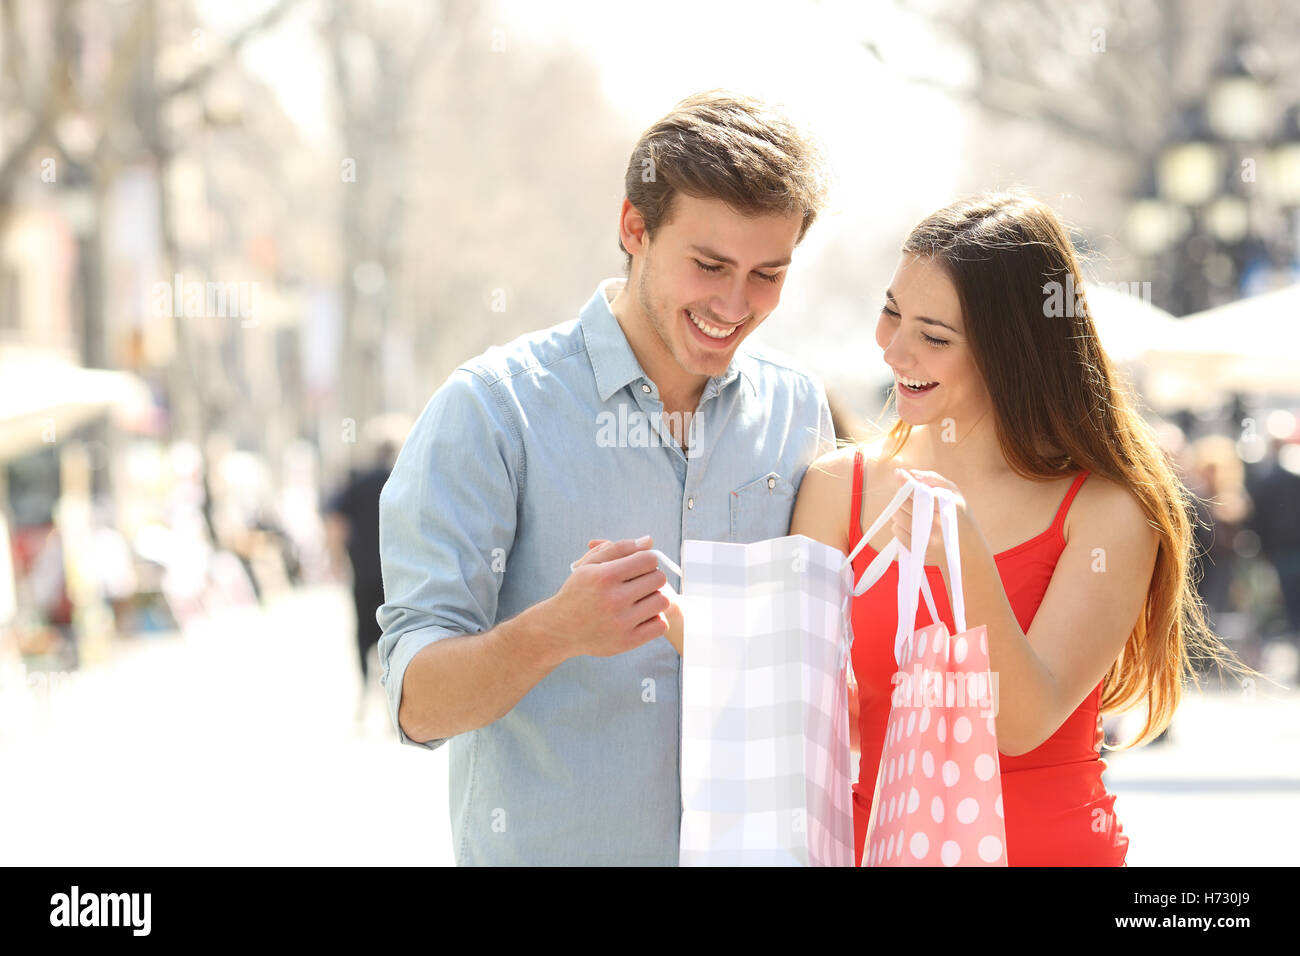 Couple shopping and holding bags in the street Stock Photo